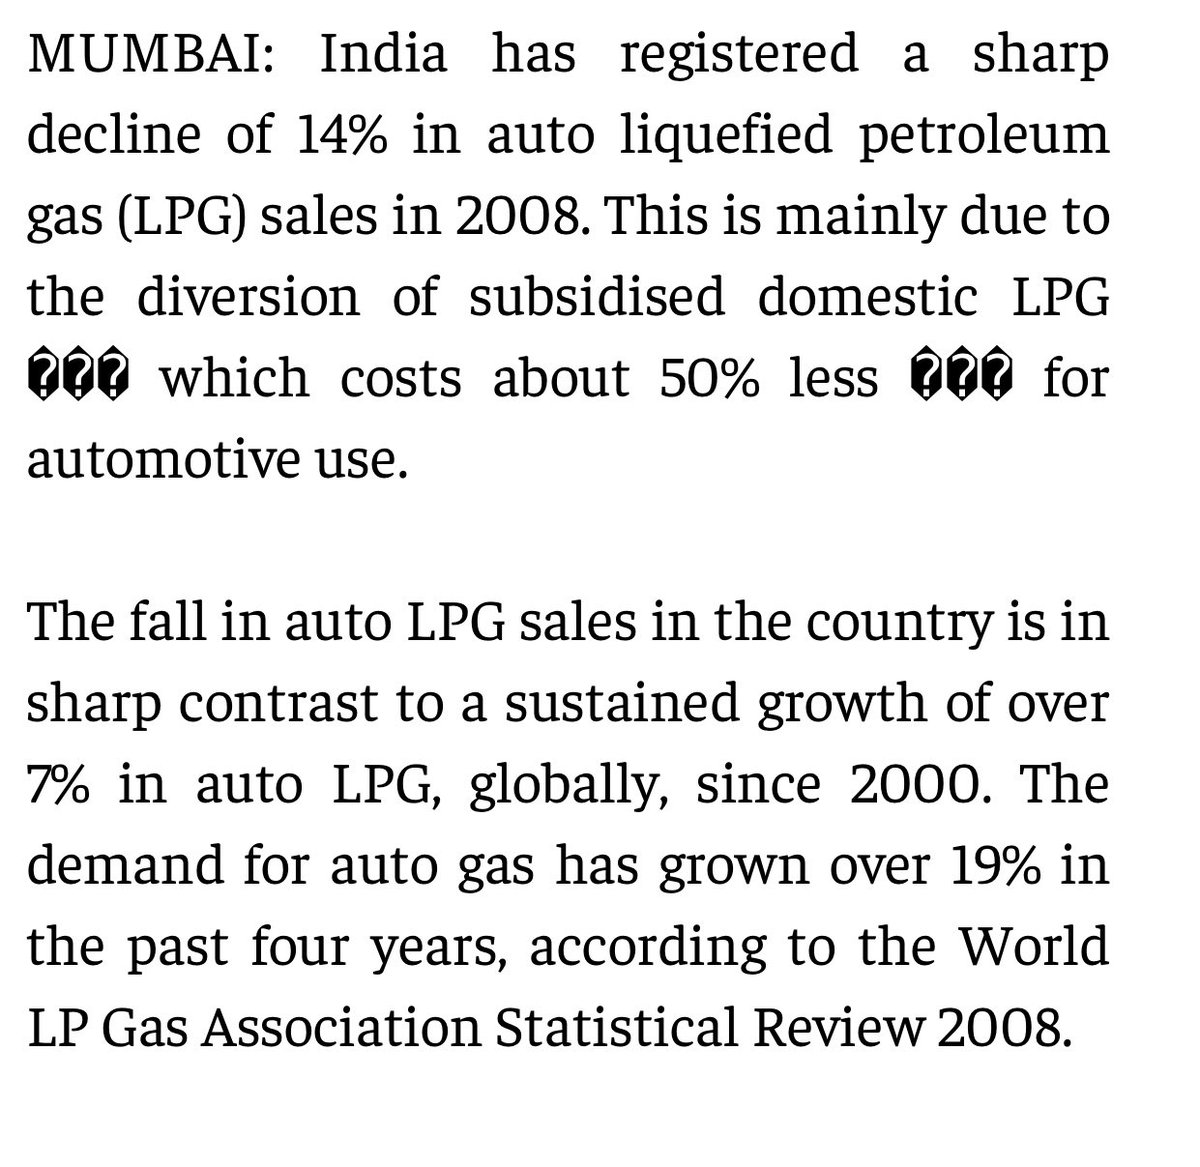 Worst of all, the Auto LPG declined after this scheme was introduced as people started using subsidised LPG cylinders for Automotive use!